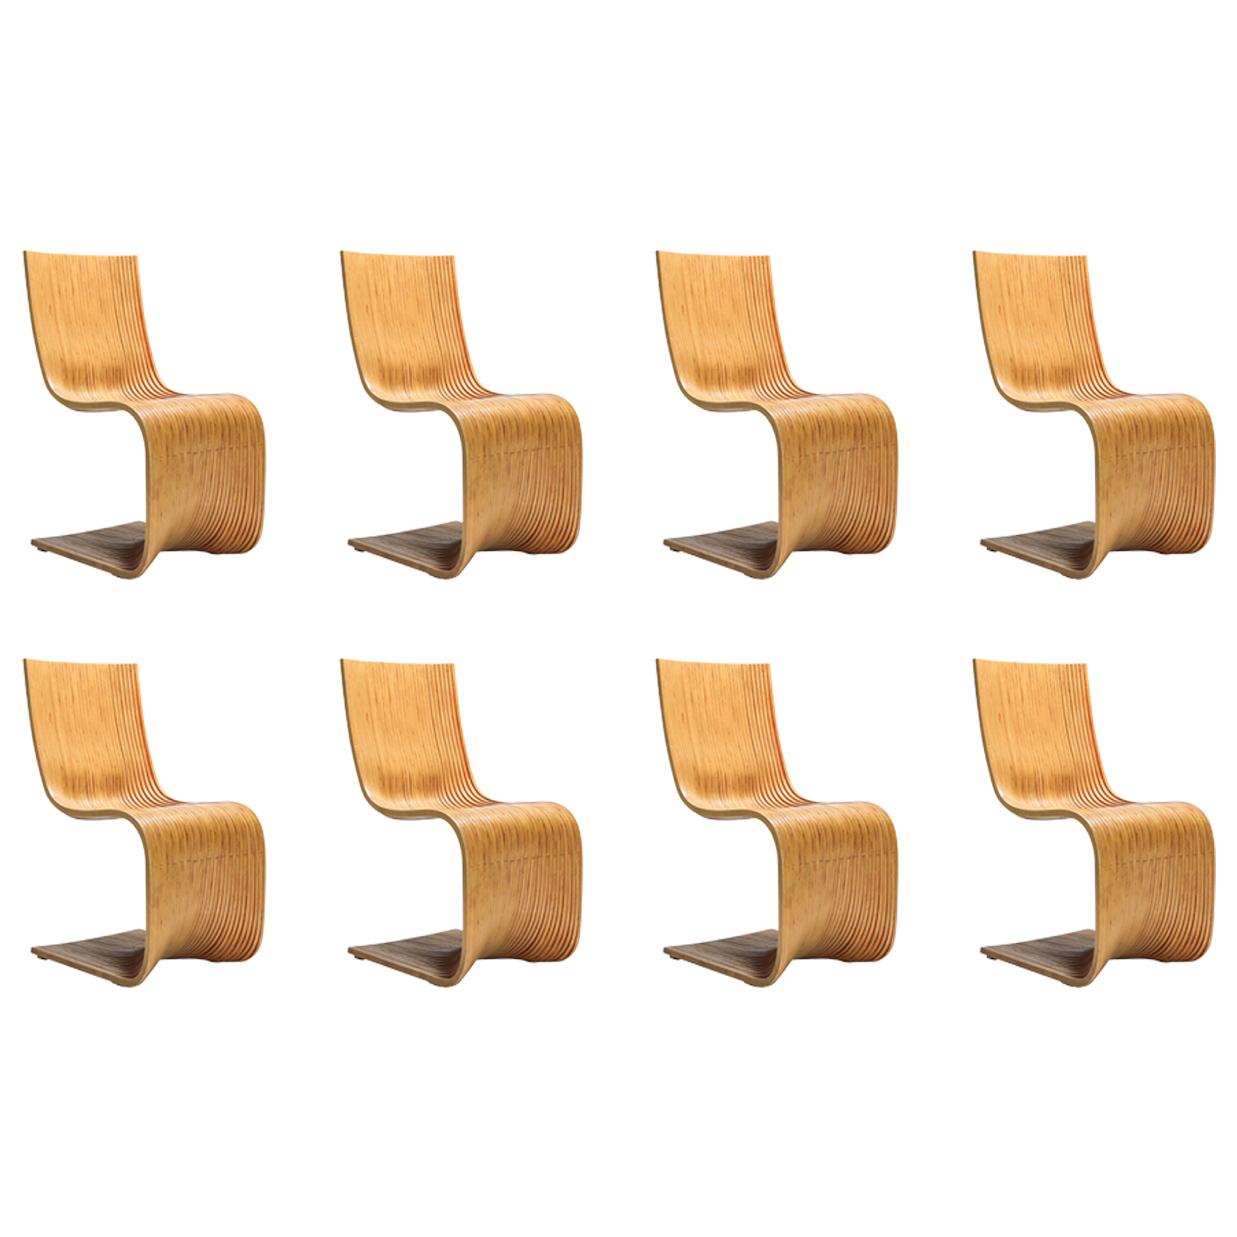 Alejandro Estrada Set of 8 Bamboo Dining Chairs for Piegatto